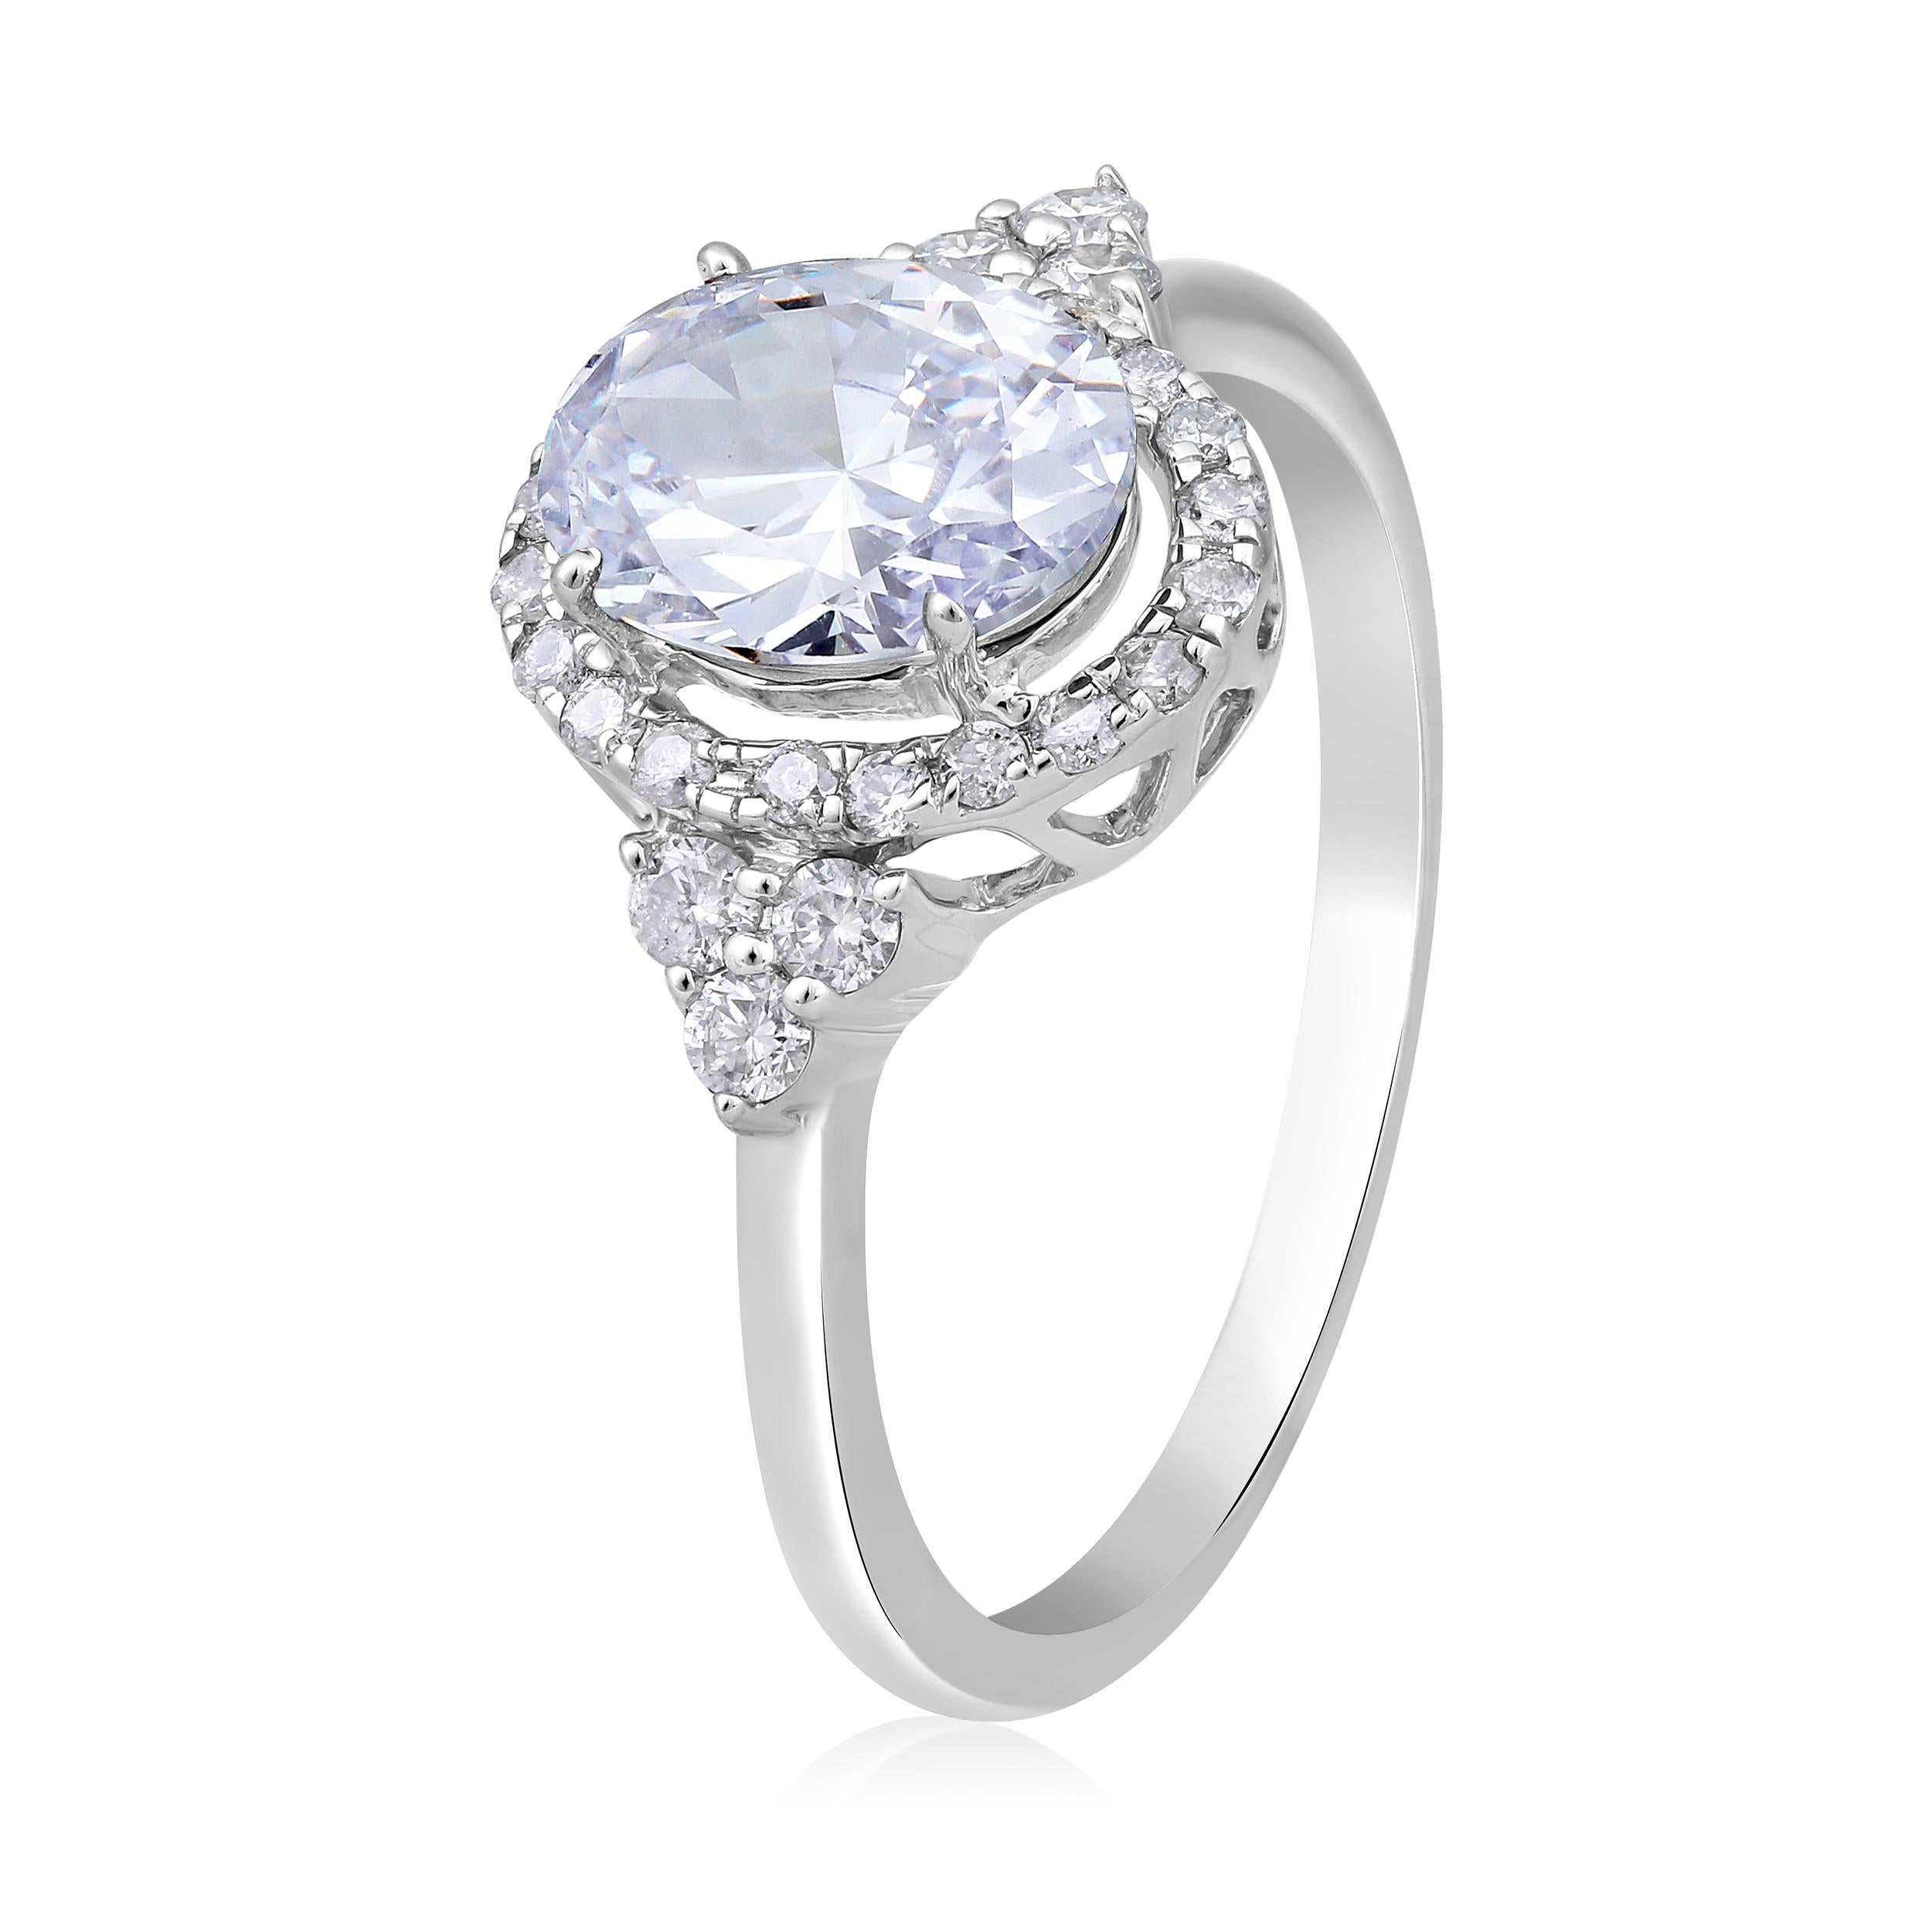 Ring Size: US 7 

Crafted in 2.58 grams of 10K White Gold, the ring contains 26 stones of Round Diamonds with a total of 0.296 carat in F-G color and I1-I2 clarity combined with 1 stone of Cubic Zirconia with a total of 2.055 carat.

CONTEMPORARY